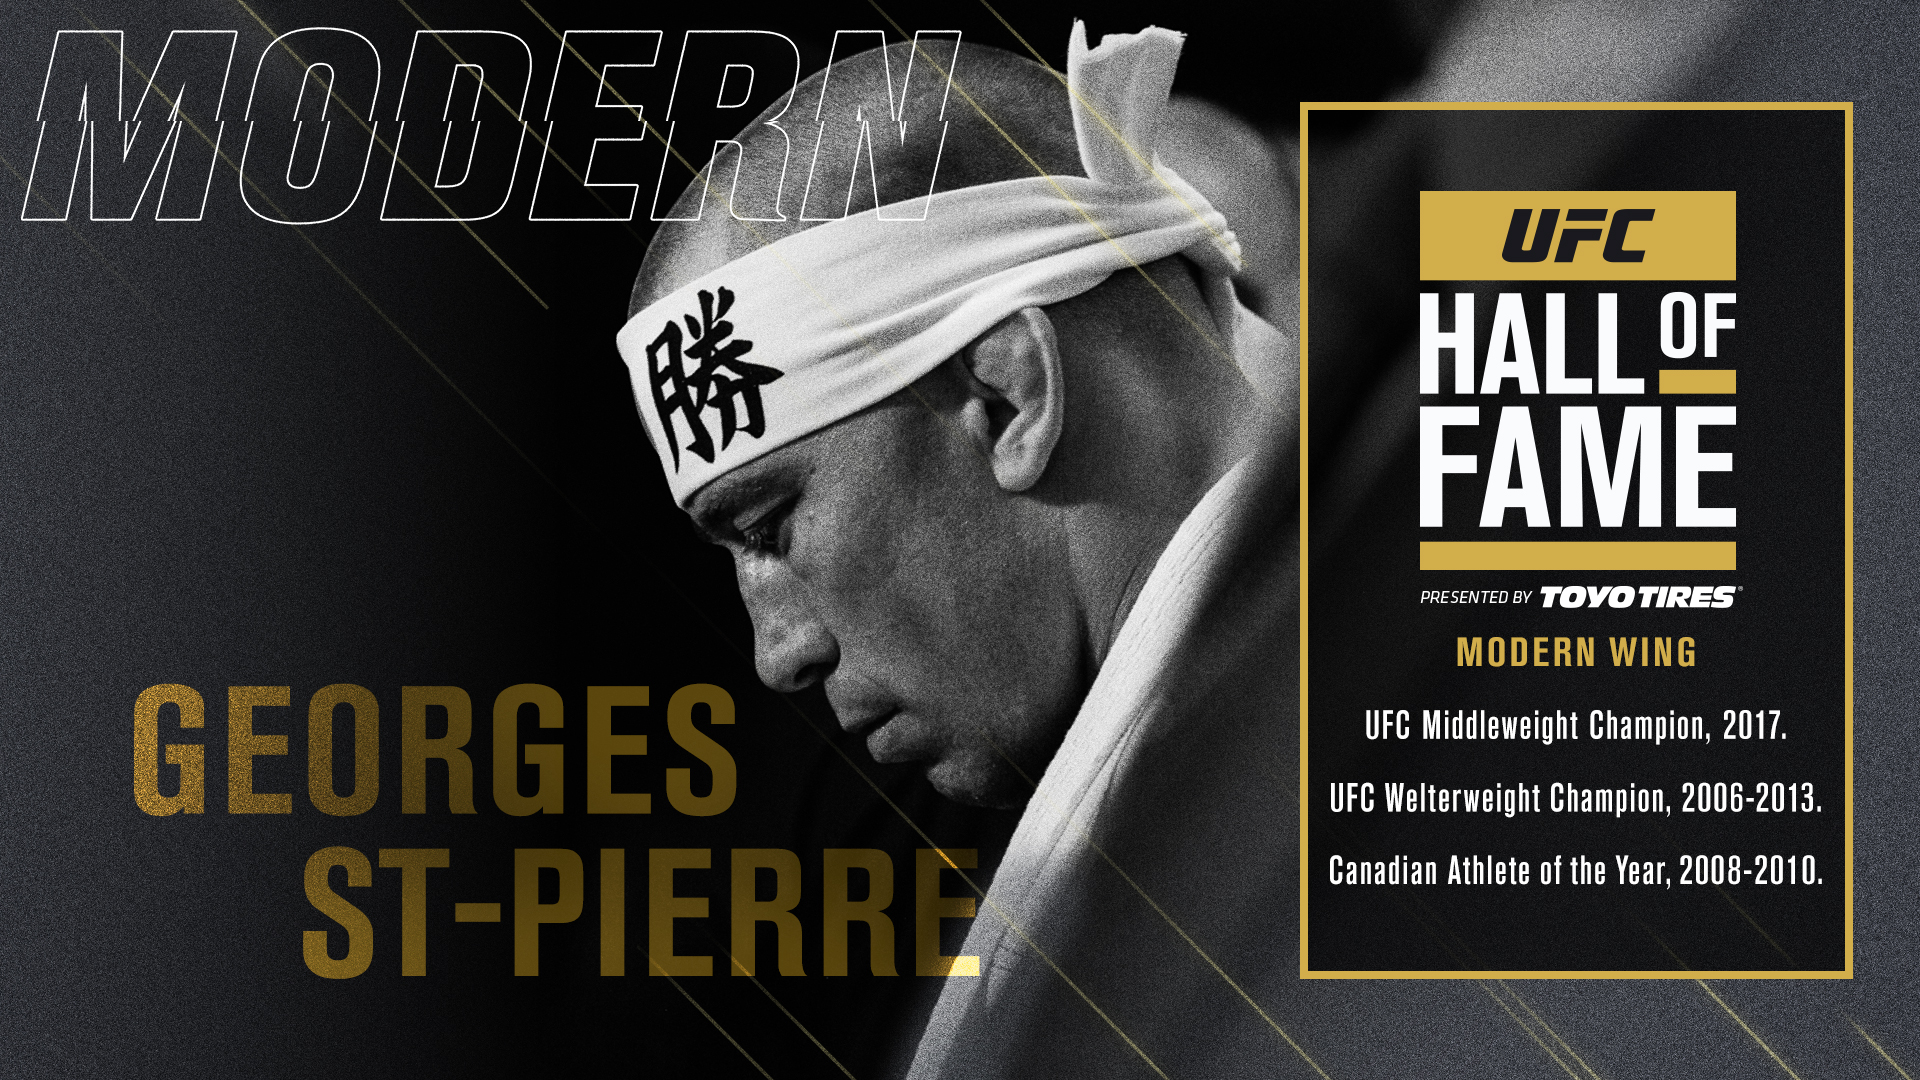 Georges St-Pierre GSP UFC Hall of Fame UFC 249 welterweight middleweight champion